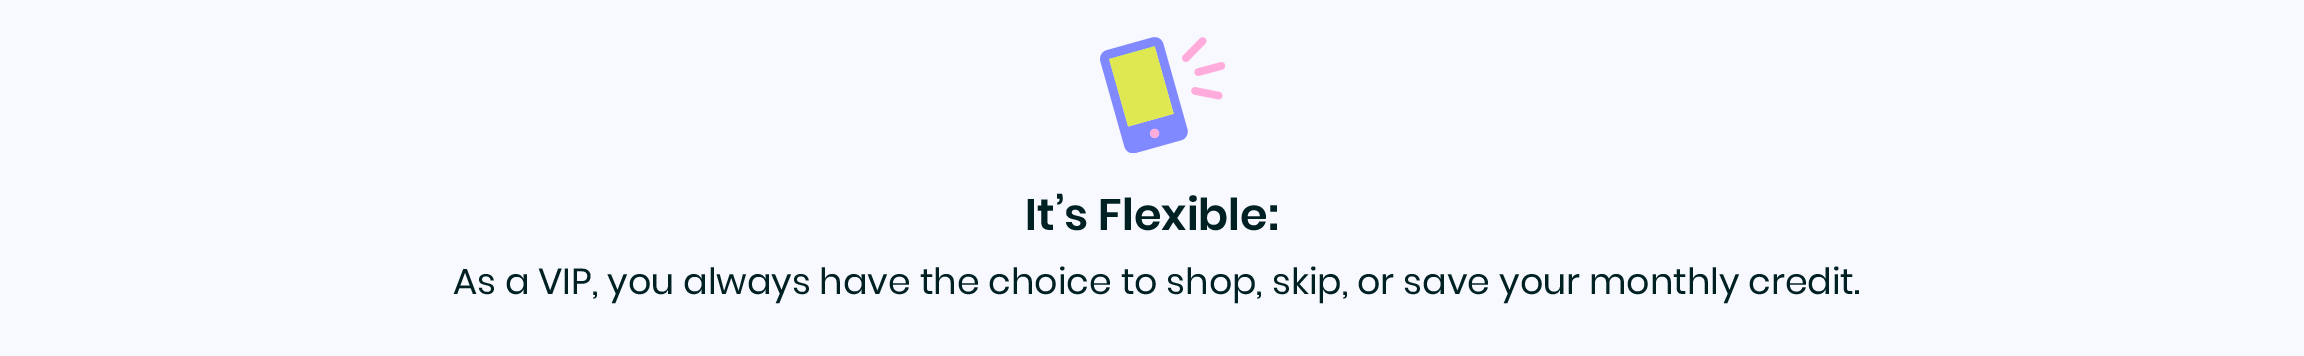 It's Flexible: As a VIP, you always have the choice to shop, skip, or save your monthly credit.